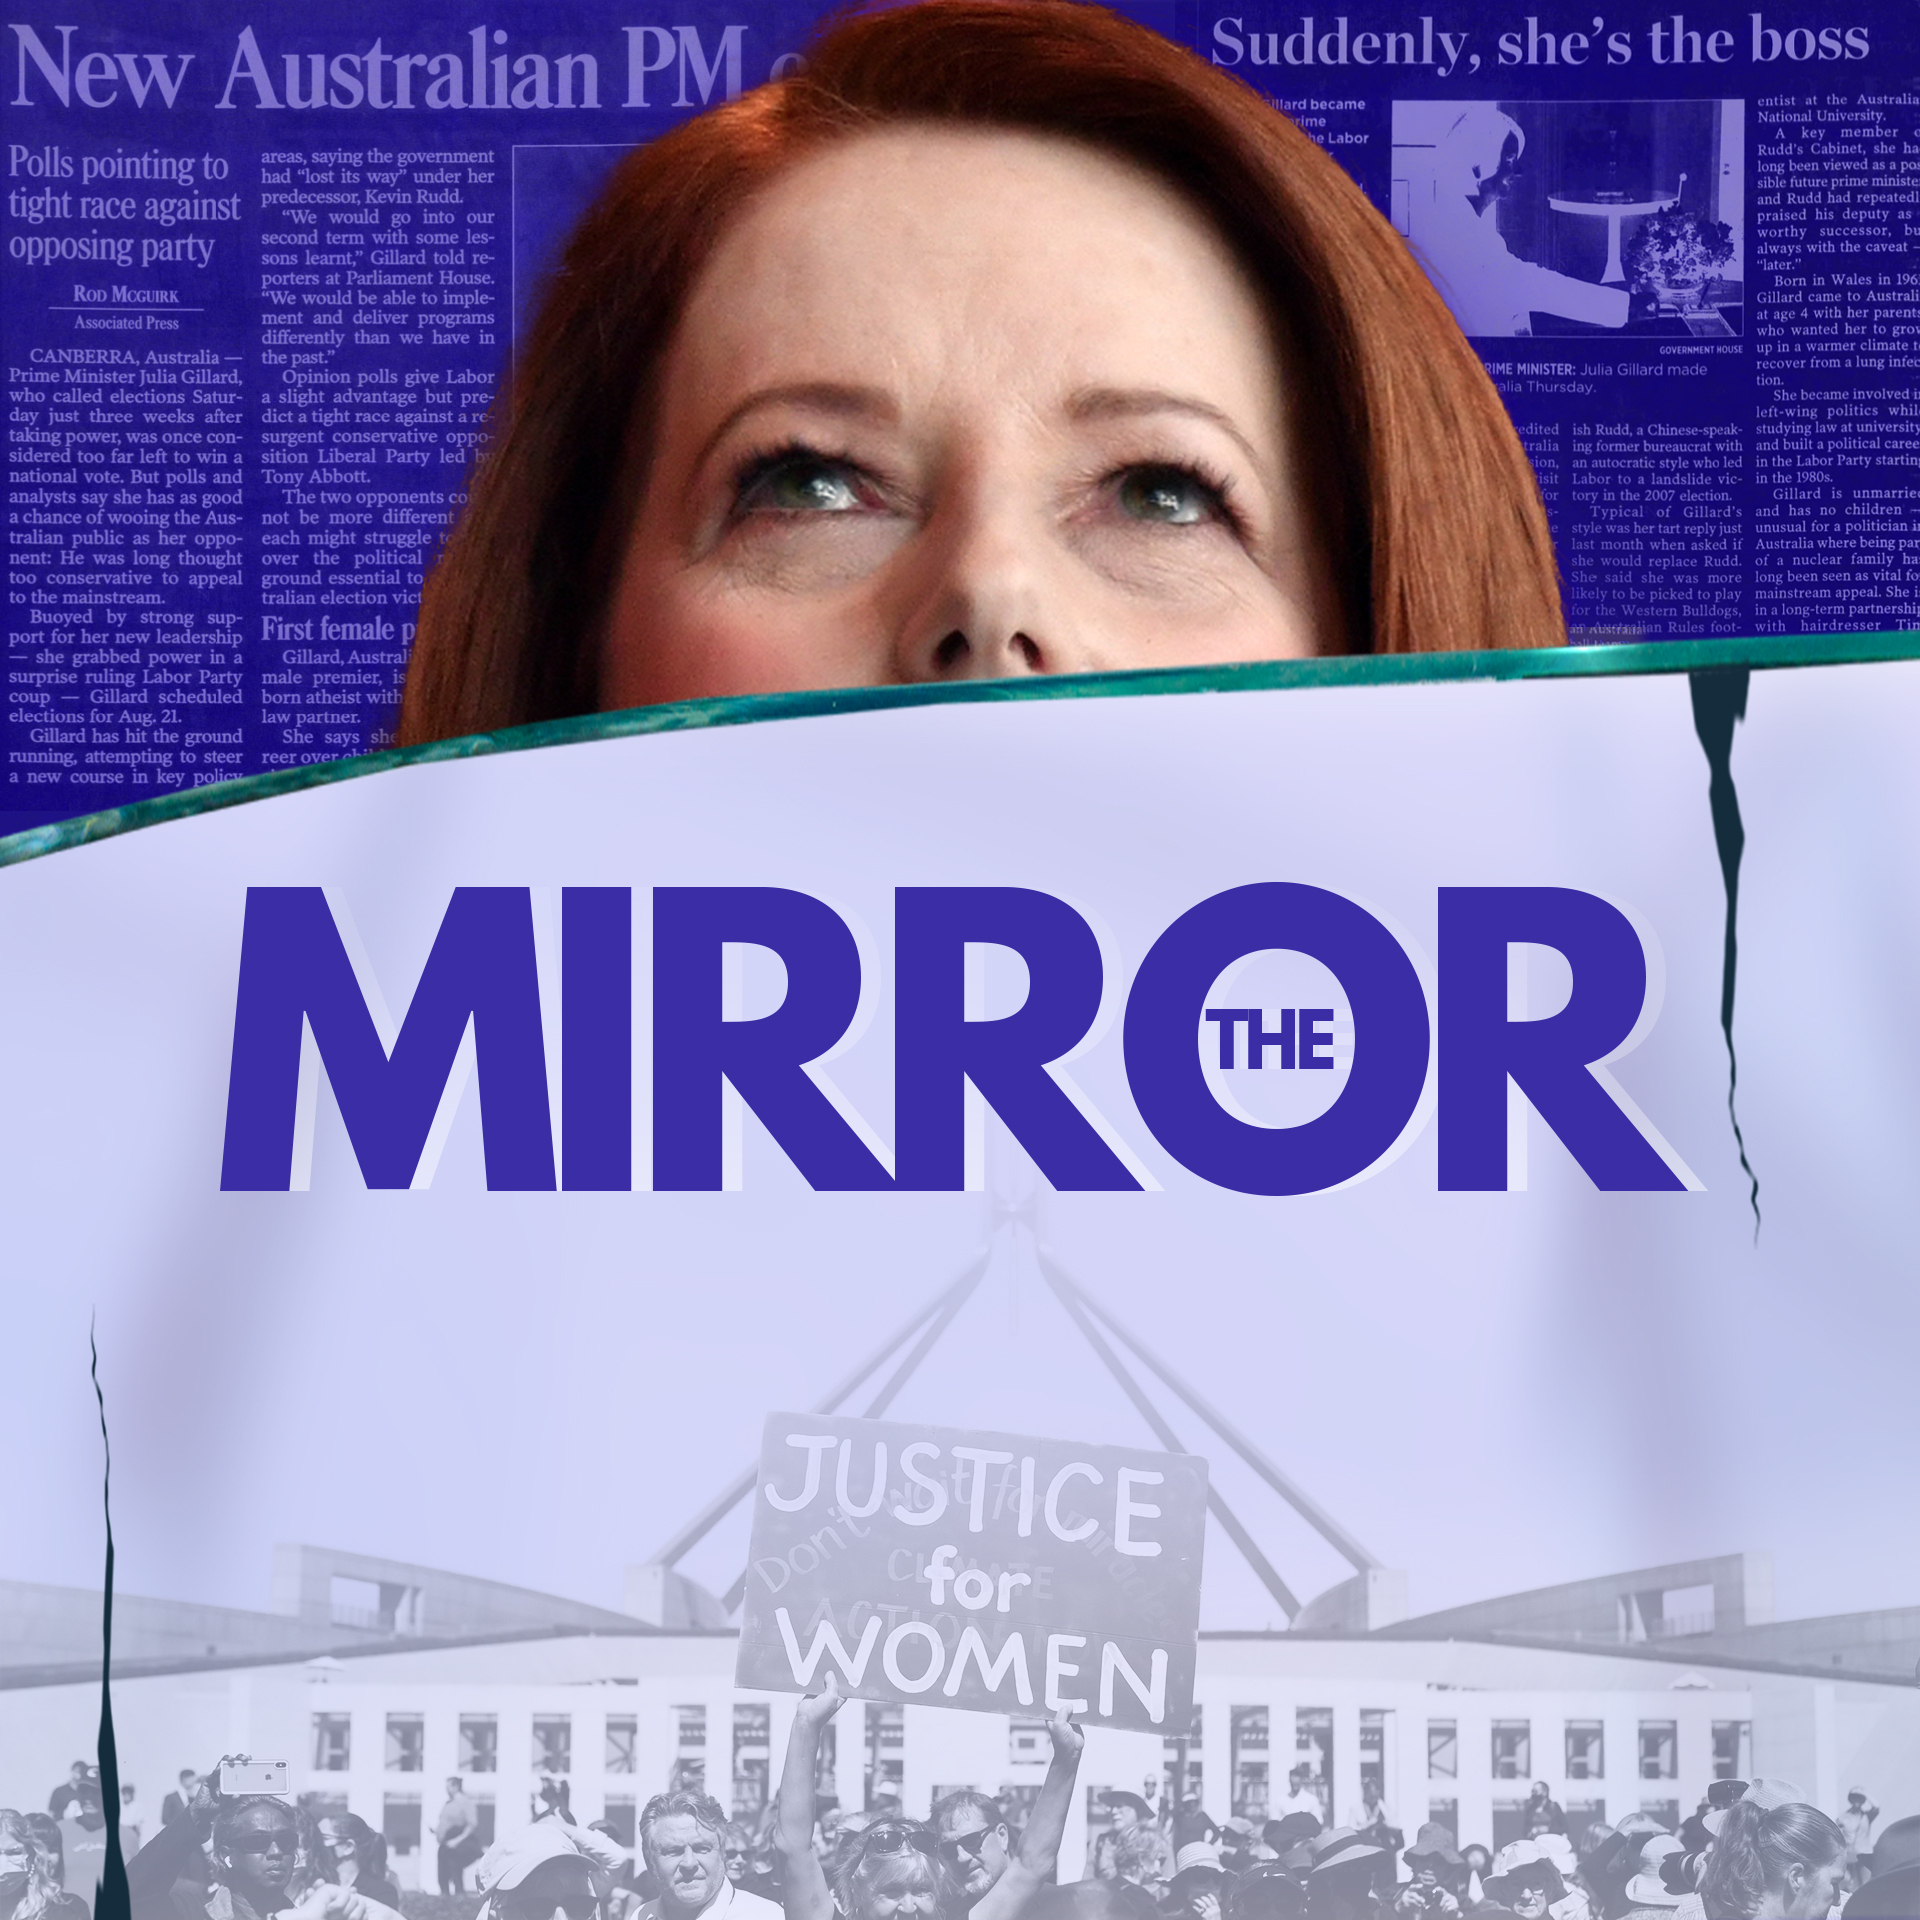 The Mirror: 01 | "Misogyny. Every day in every way."